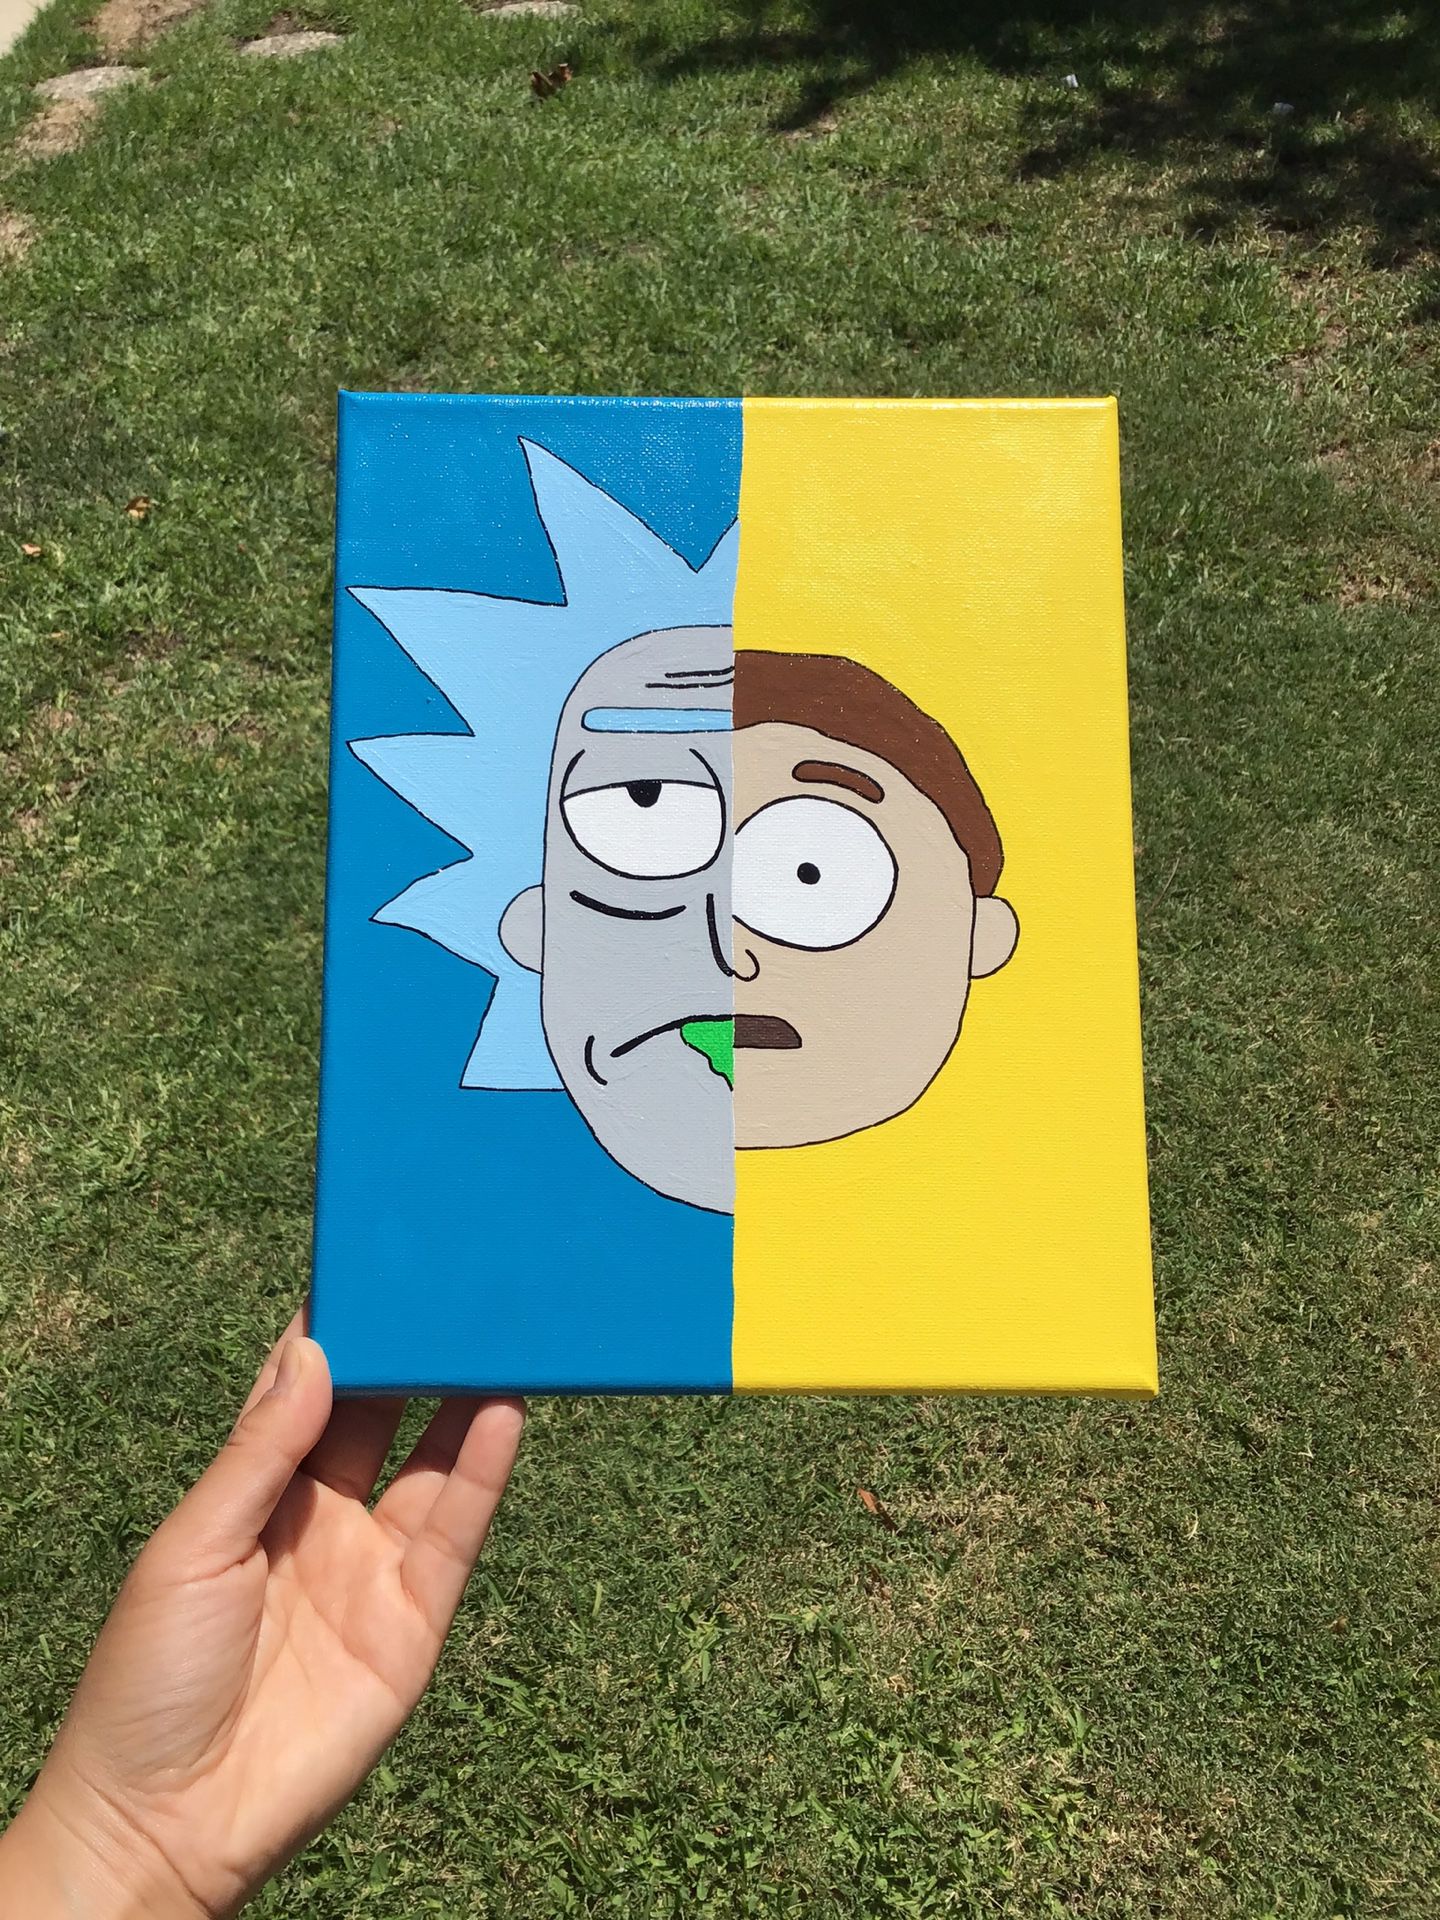 Rick And Morty Painting Rick Sanchez Morty Smith Figure Wall Art Acrylic Canvas Artwork Handmade Hand Painted Rick Morty Collectibles